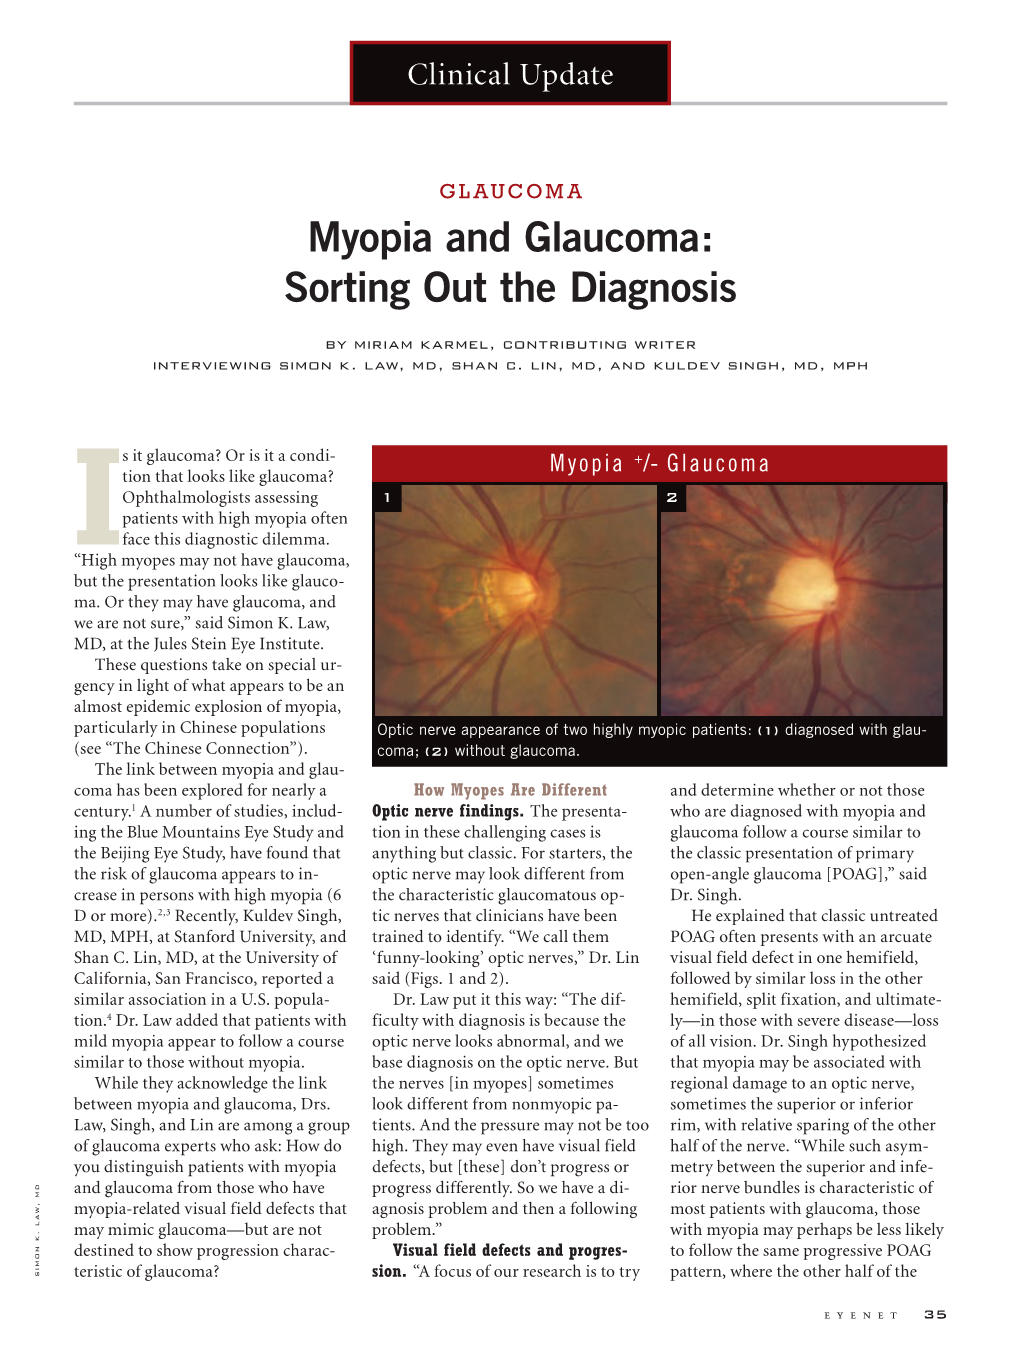 Myopia and Glaucoma: Sorting out the Diagnosis